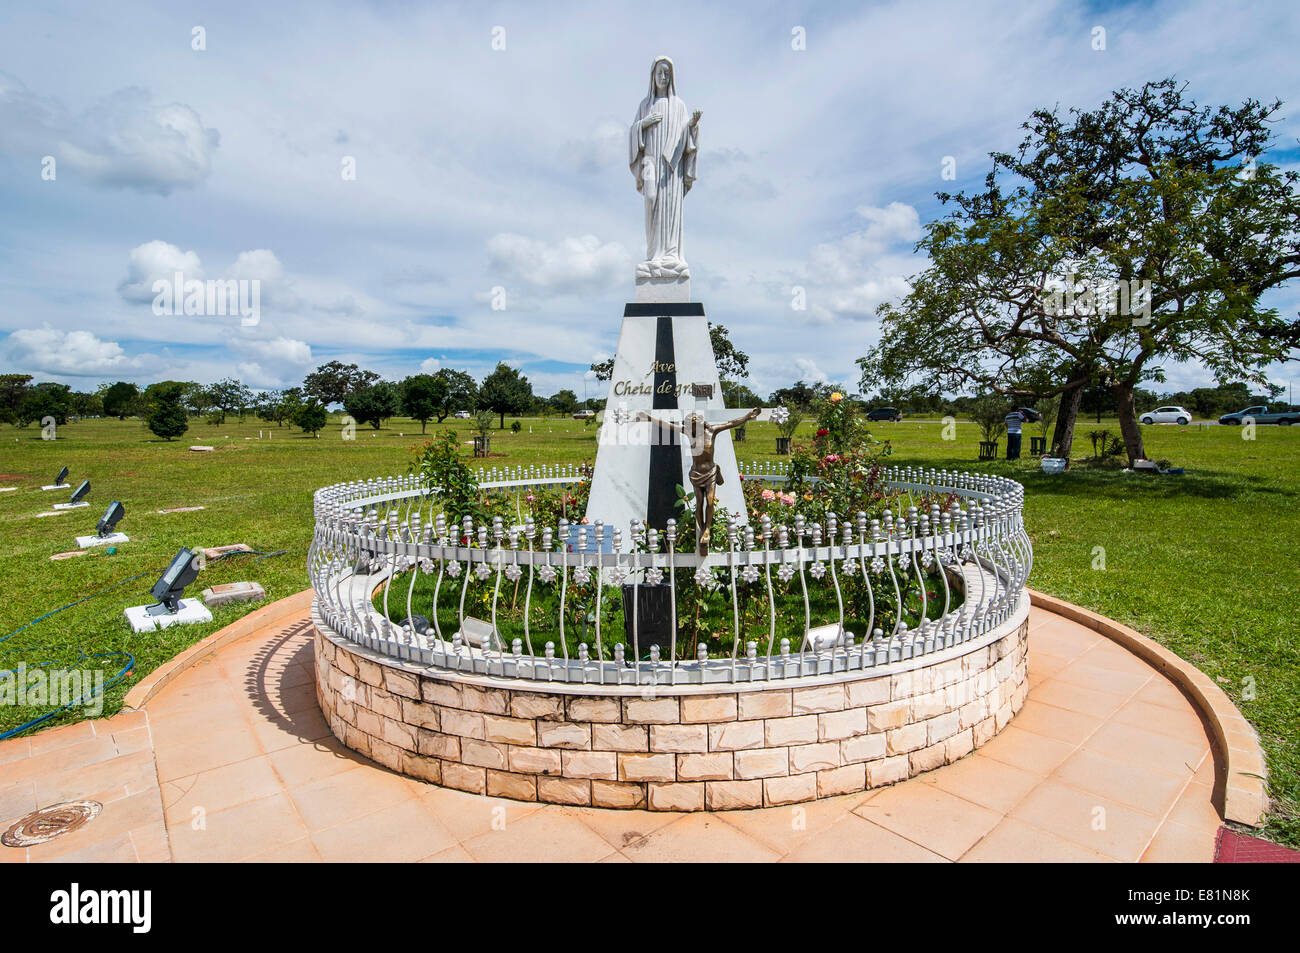 Christian statue in front of the Military church, Brasília, Brazil Stock Photo